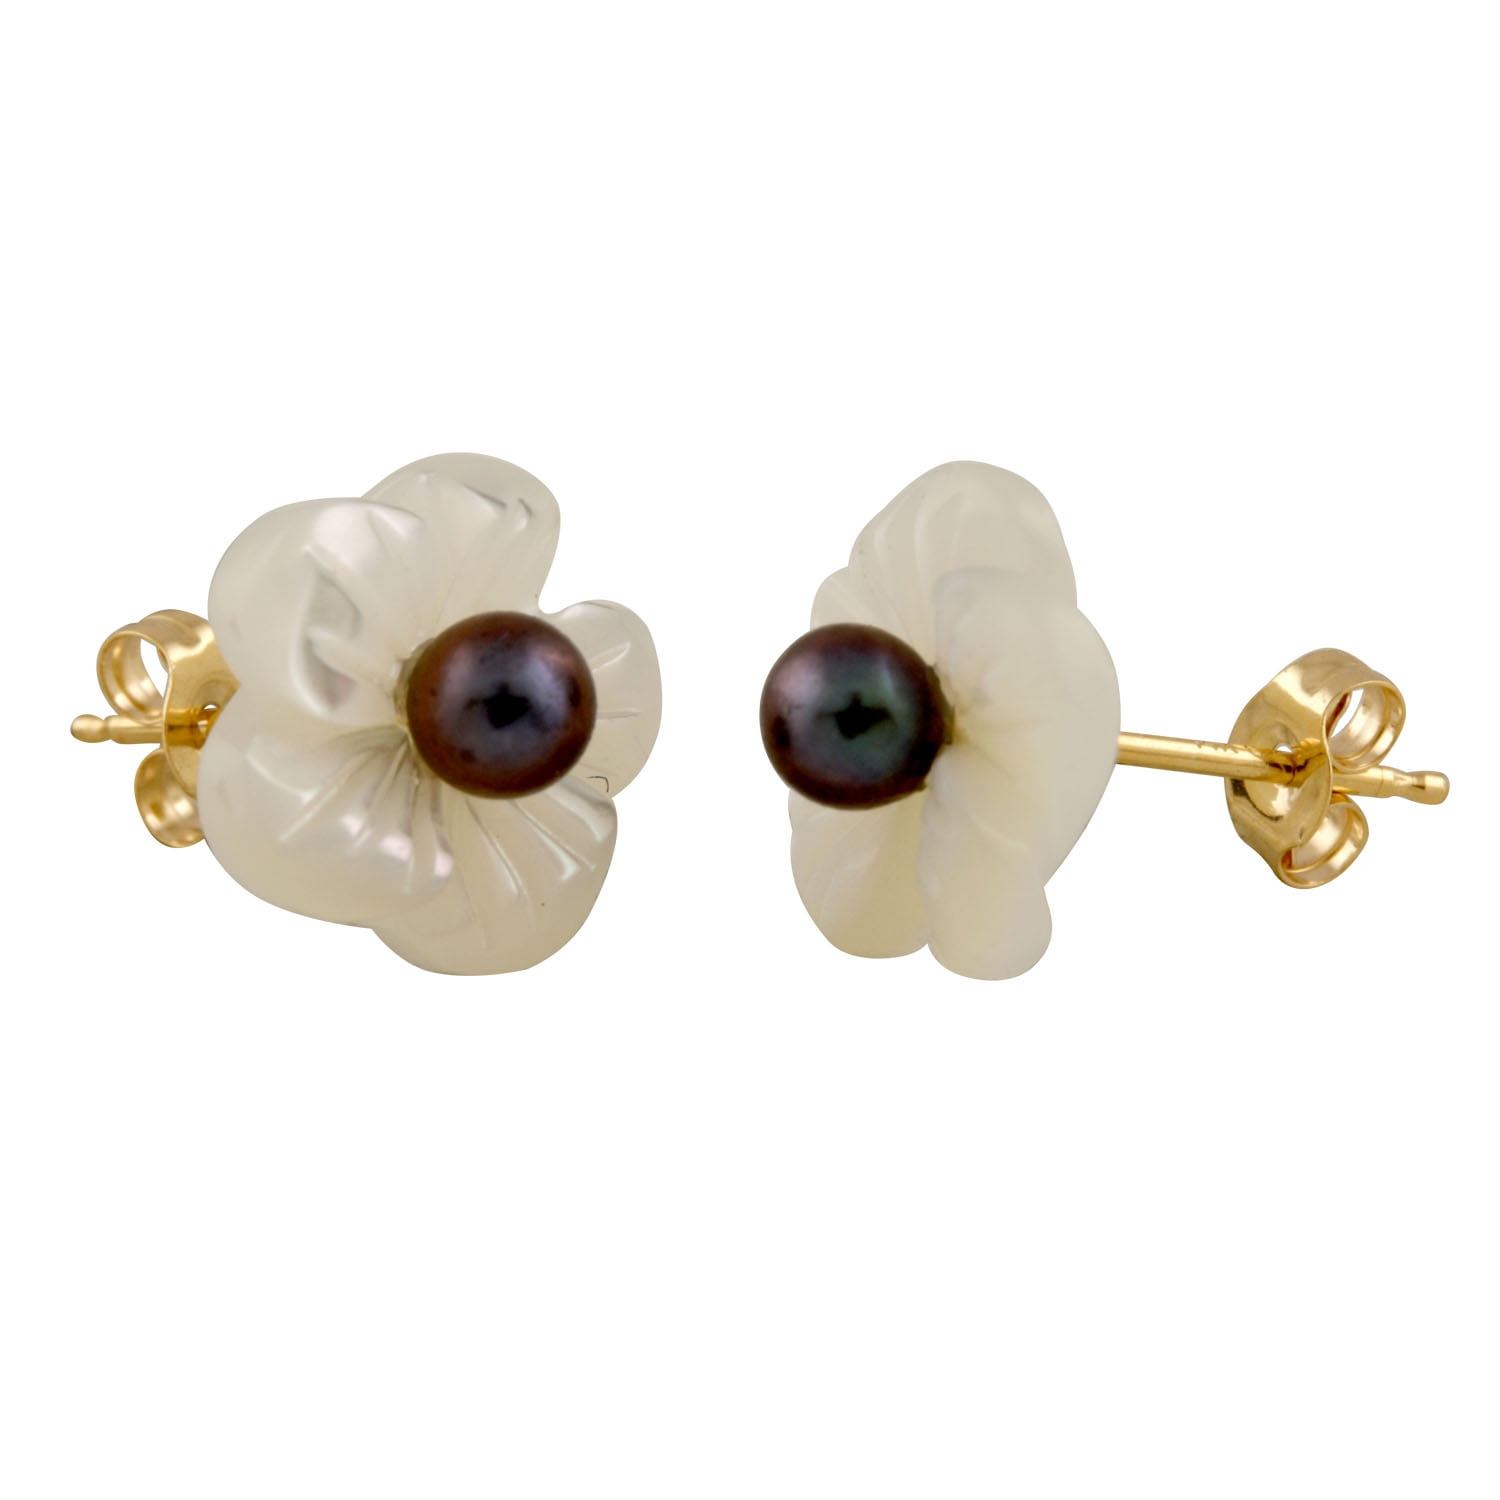 Details about   14k 14kt Yellow Gold 9-10mm Coffee Round FW Cultured Pearl Stud Earrings